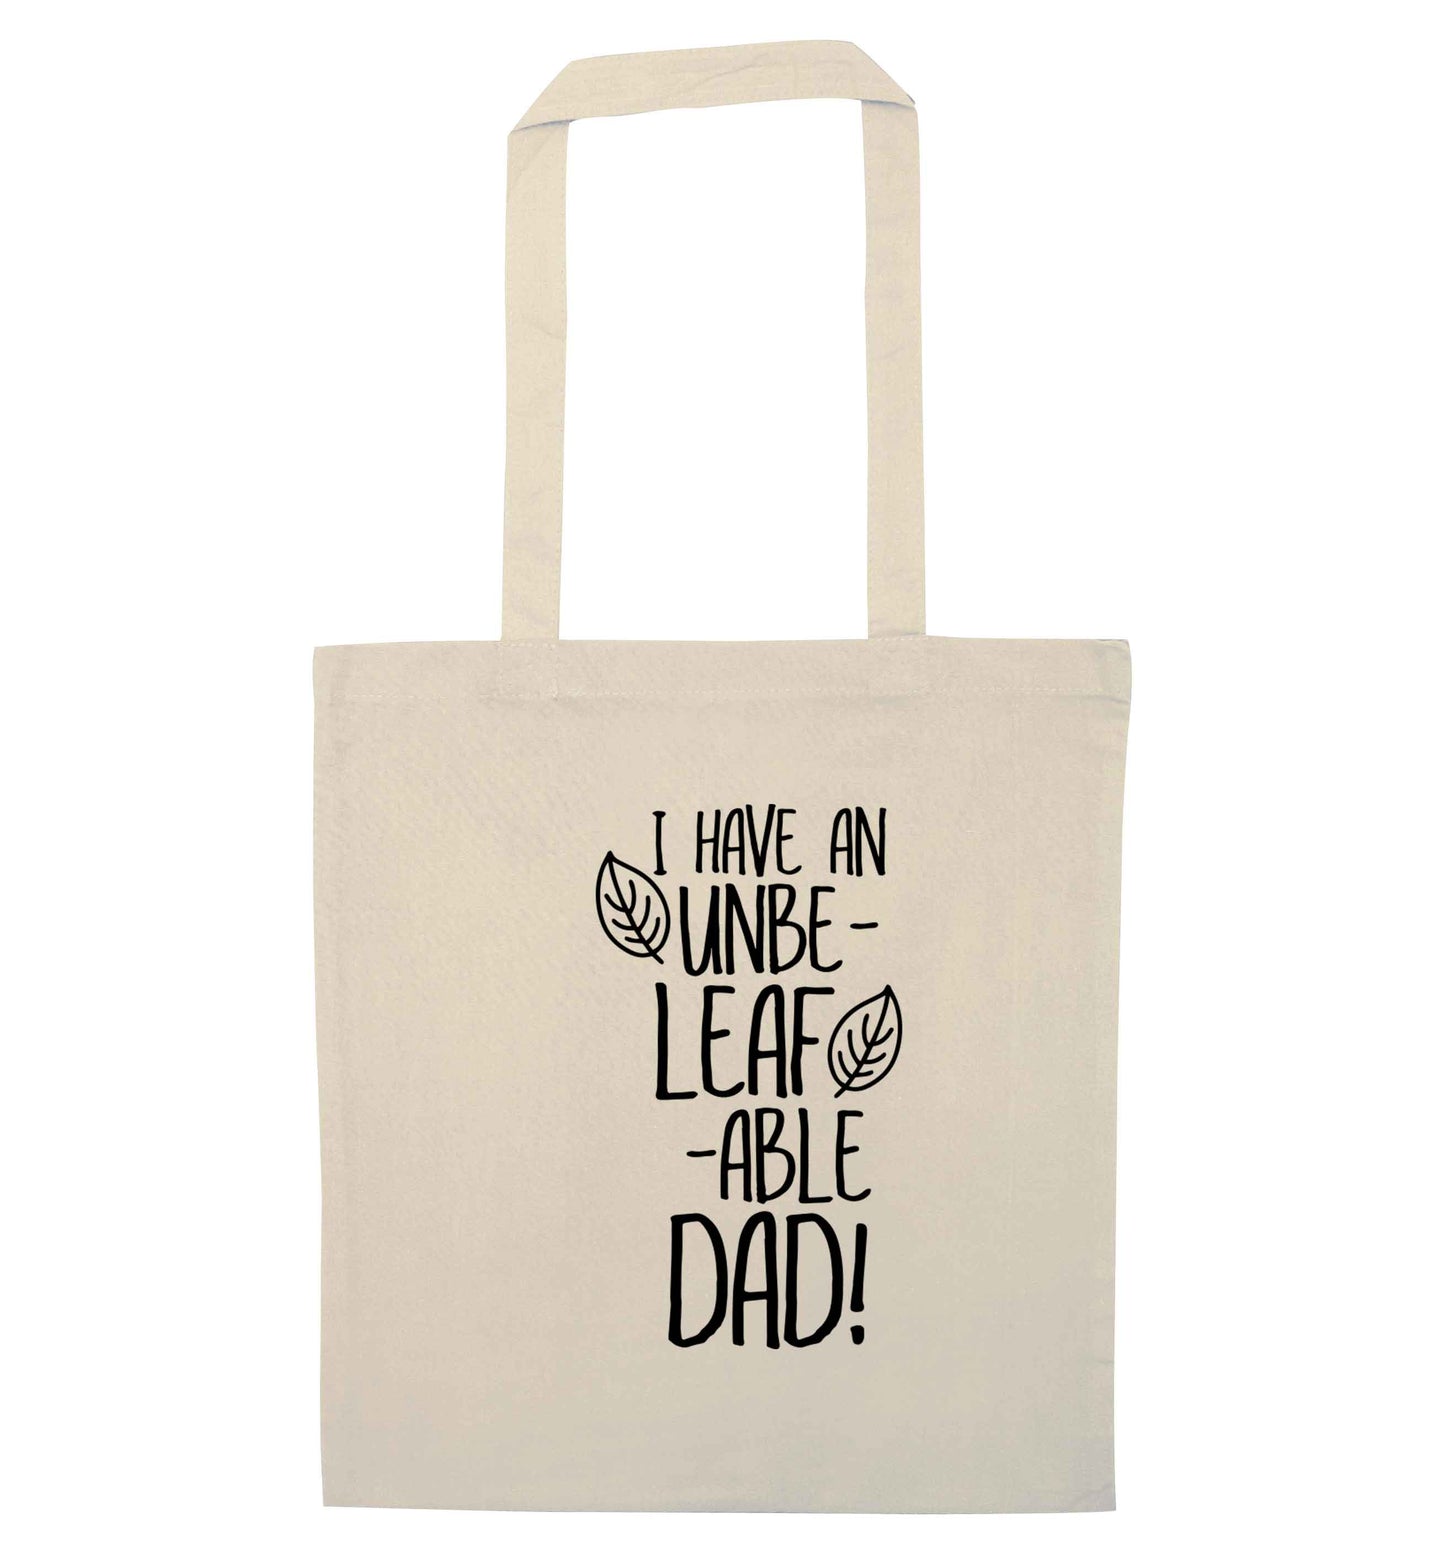 I have an unbe-leaf-able dad natural tote bag